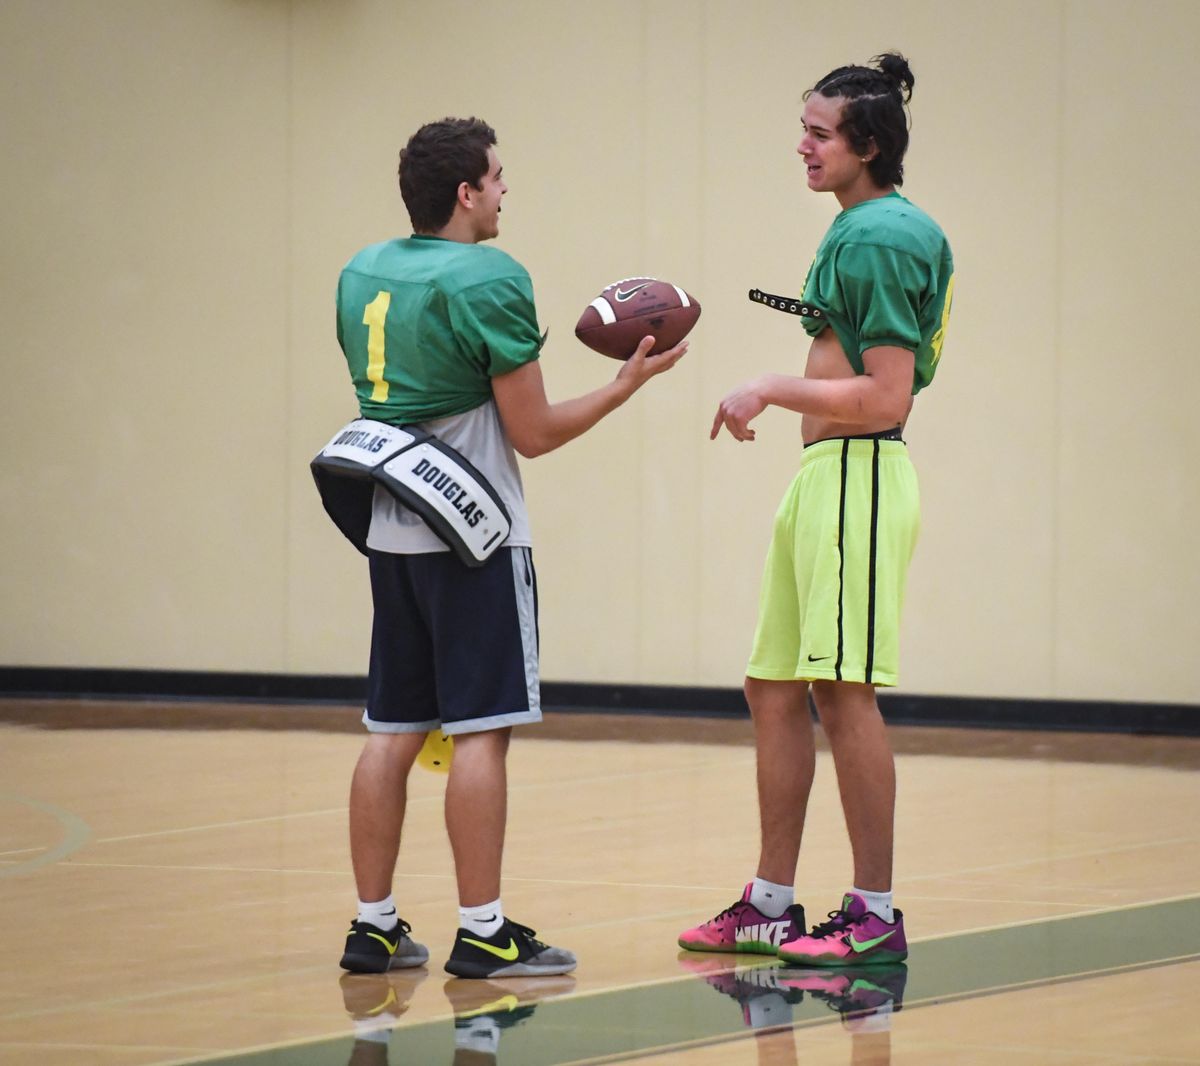 Shadle Park High School quarterback Carson Doyle, left, and wide receiver Xavier Atkins gather before practice, Wednesday, Aug. 22, 2018. (Dan Pelle / The Spokesman-Review)